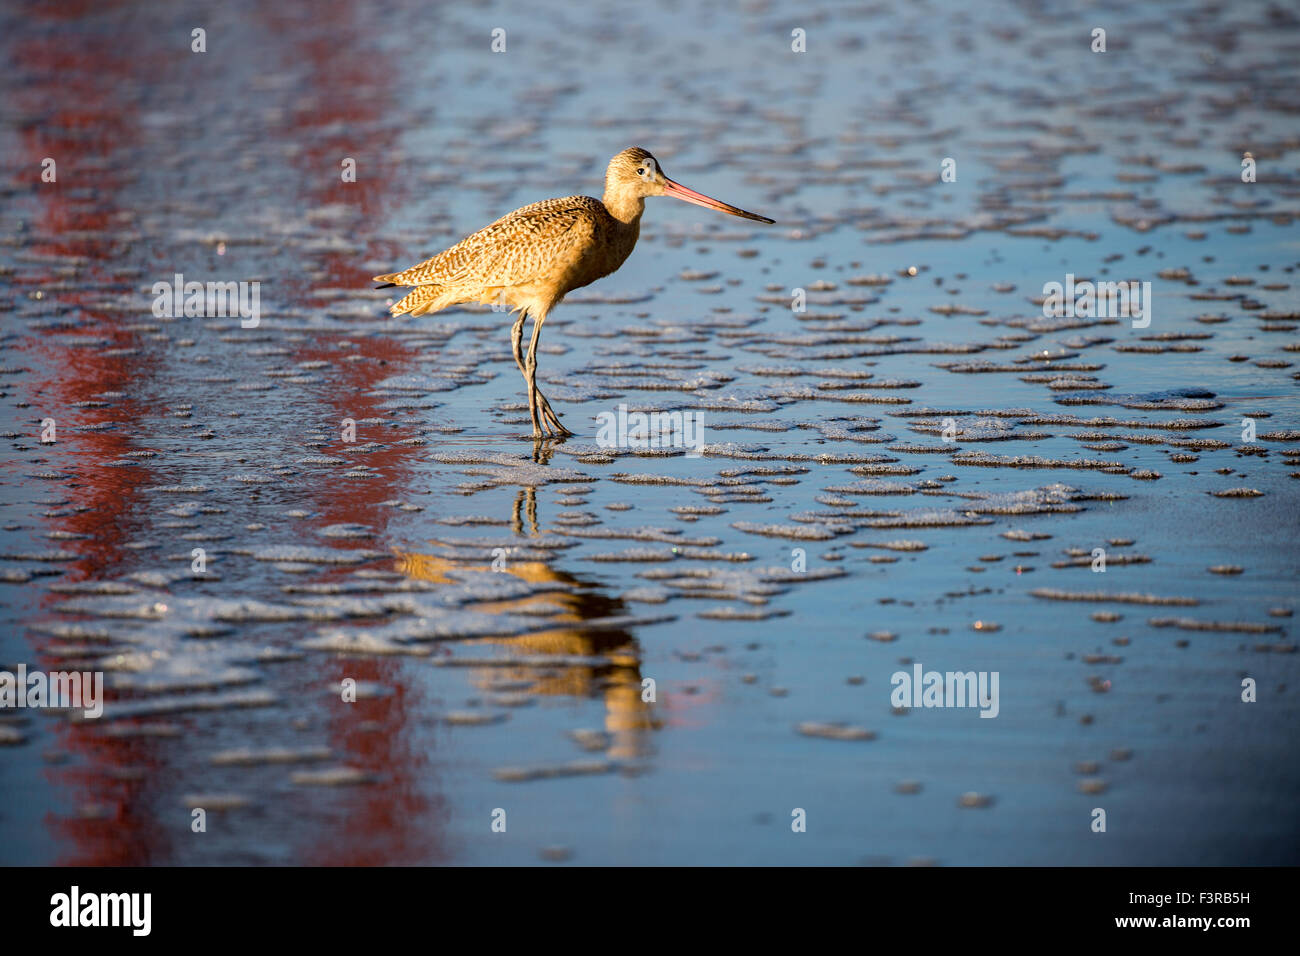 Long-billed Dowitcher (Limnodromus scolopaceus) reflected by famous Golden-Gate Bridge. Stock Photo